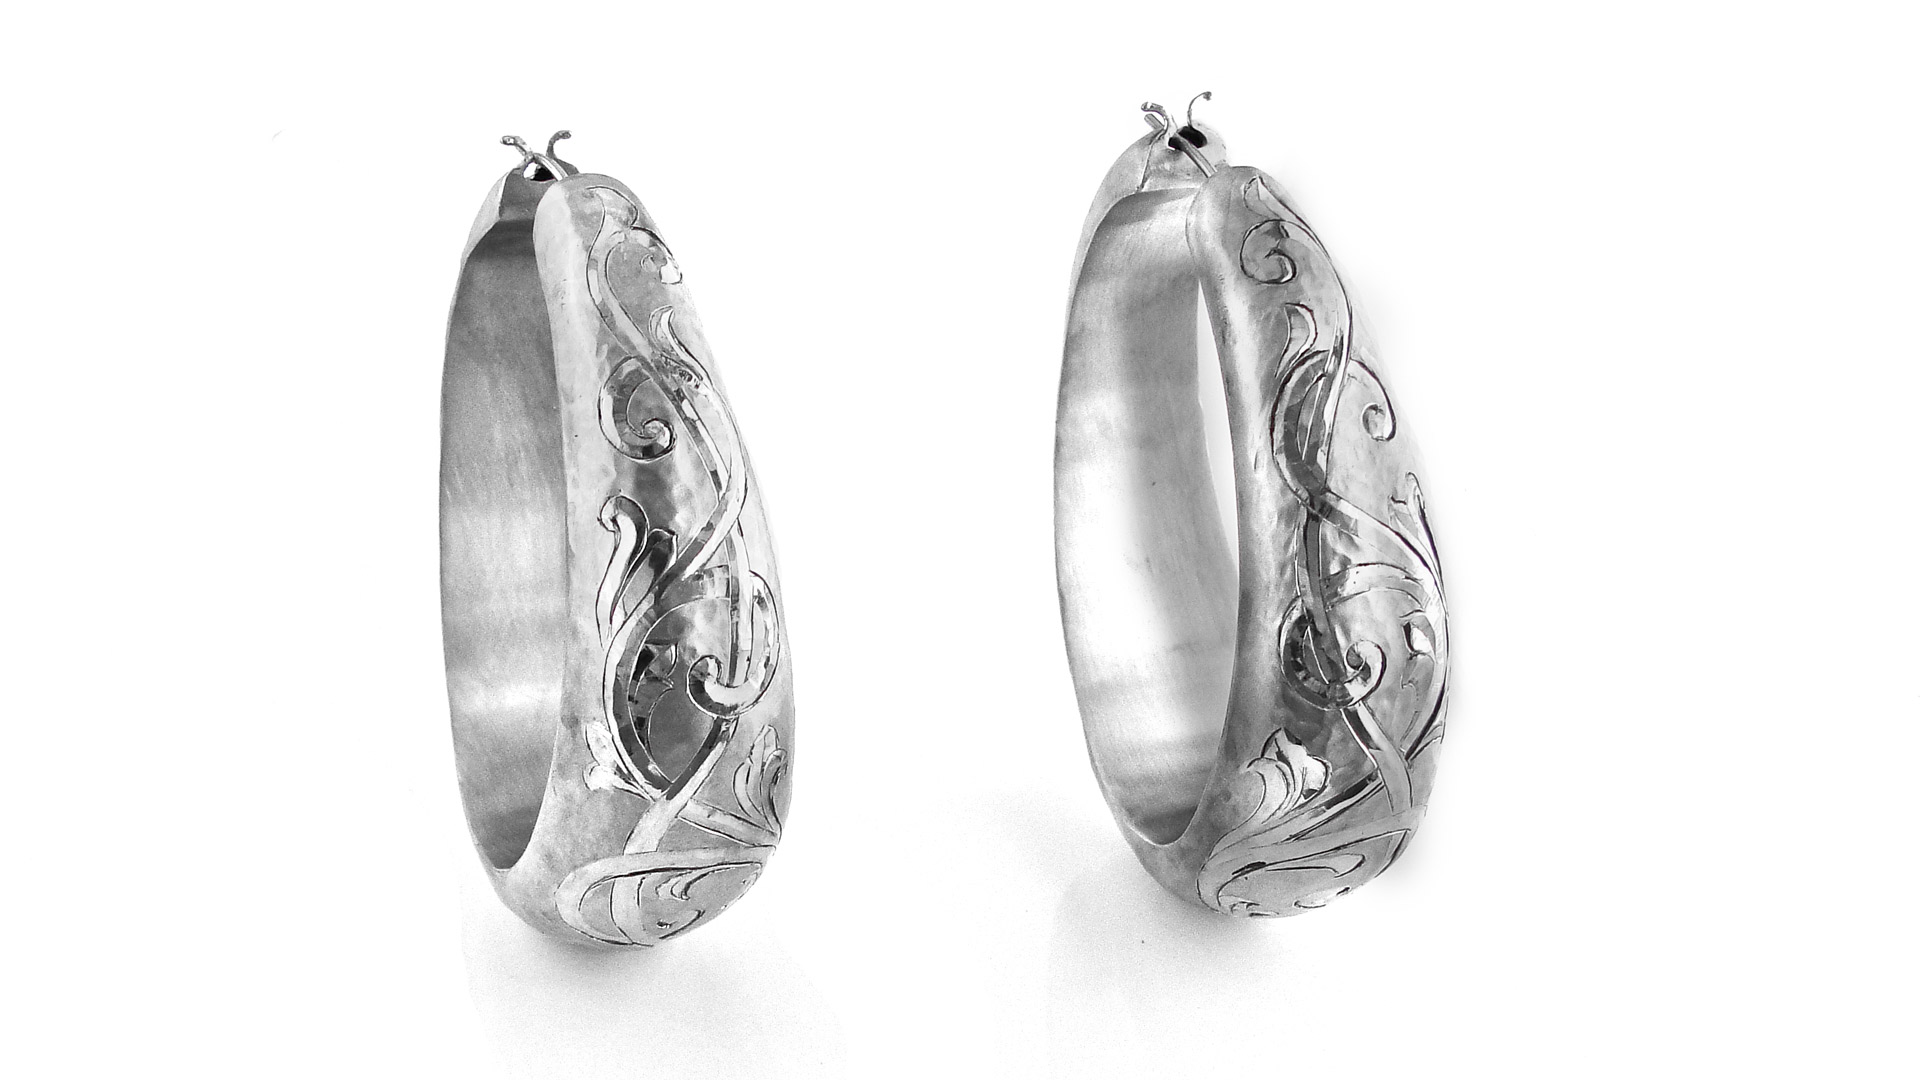 Hand forged Palladium earrings by Celeste Tracy